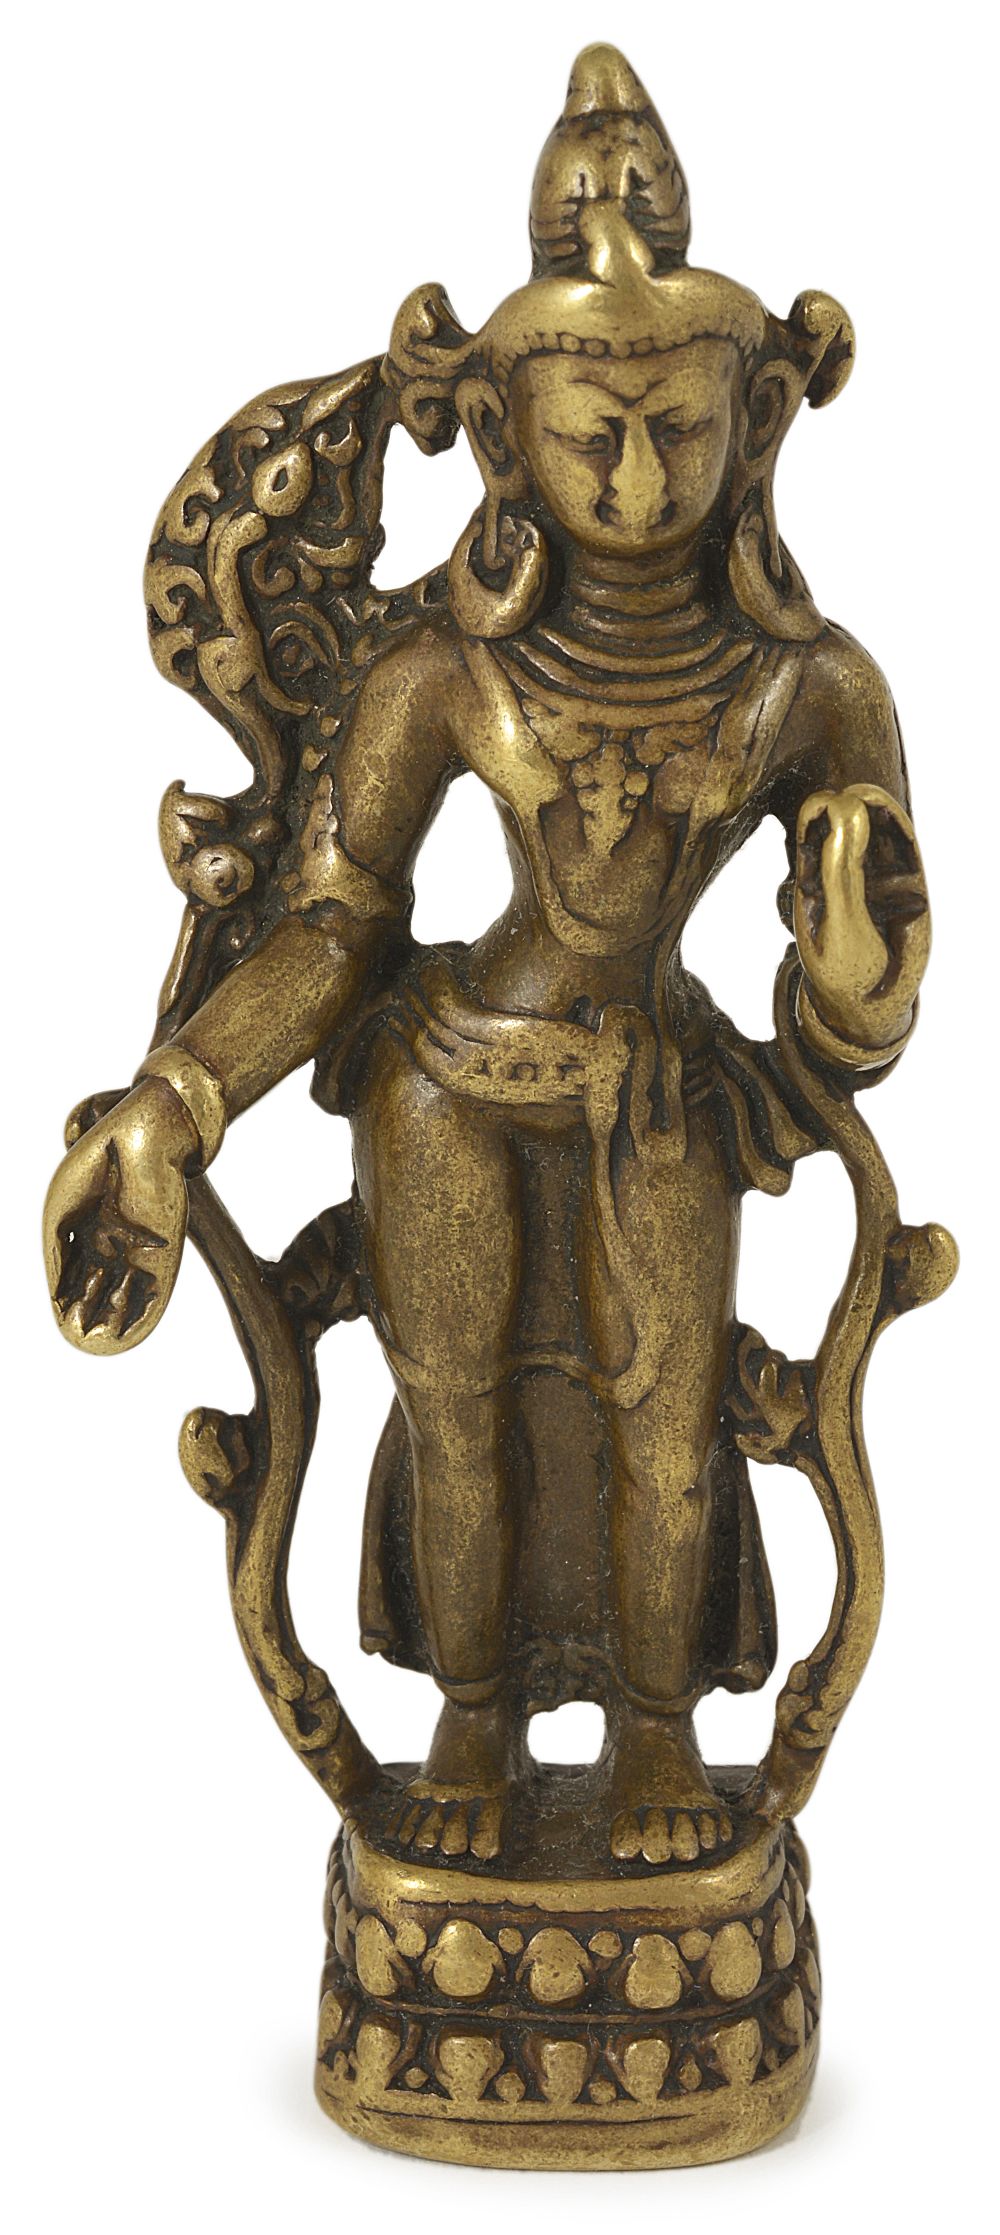 A SMALL PALA BRONZE FIGURE OF PADMAPANI, EASTERN INDIA, 11TH/12TH CENTURY standing in tribhanga on a